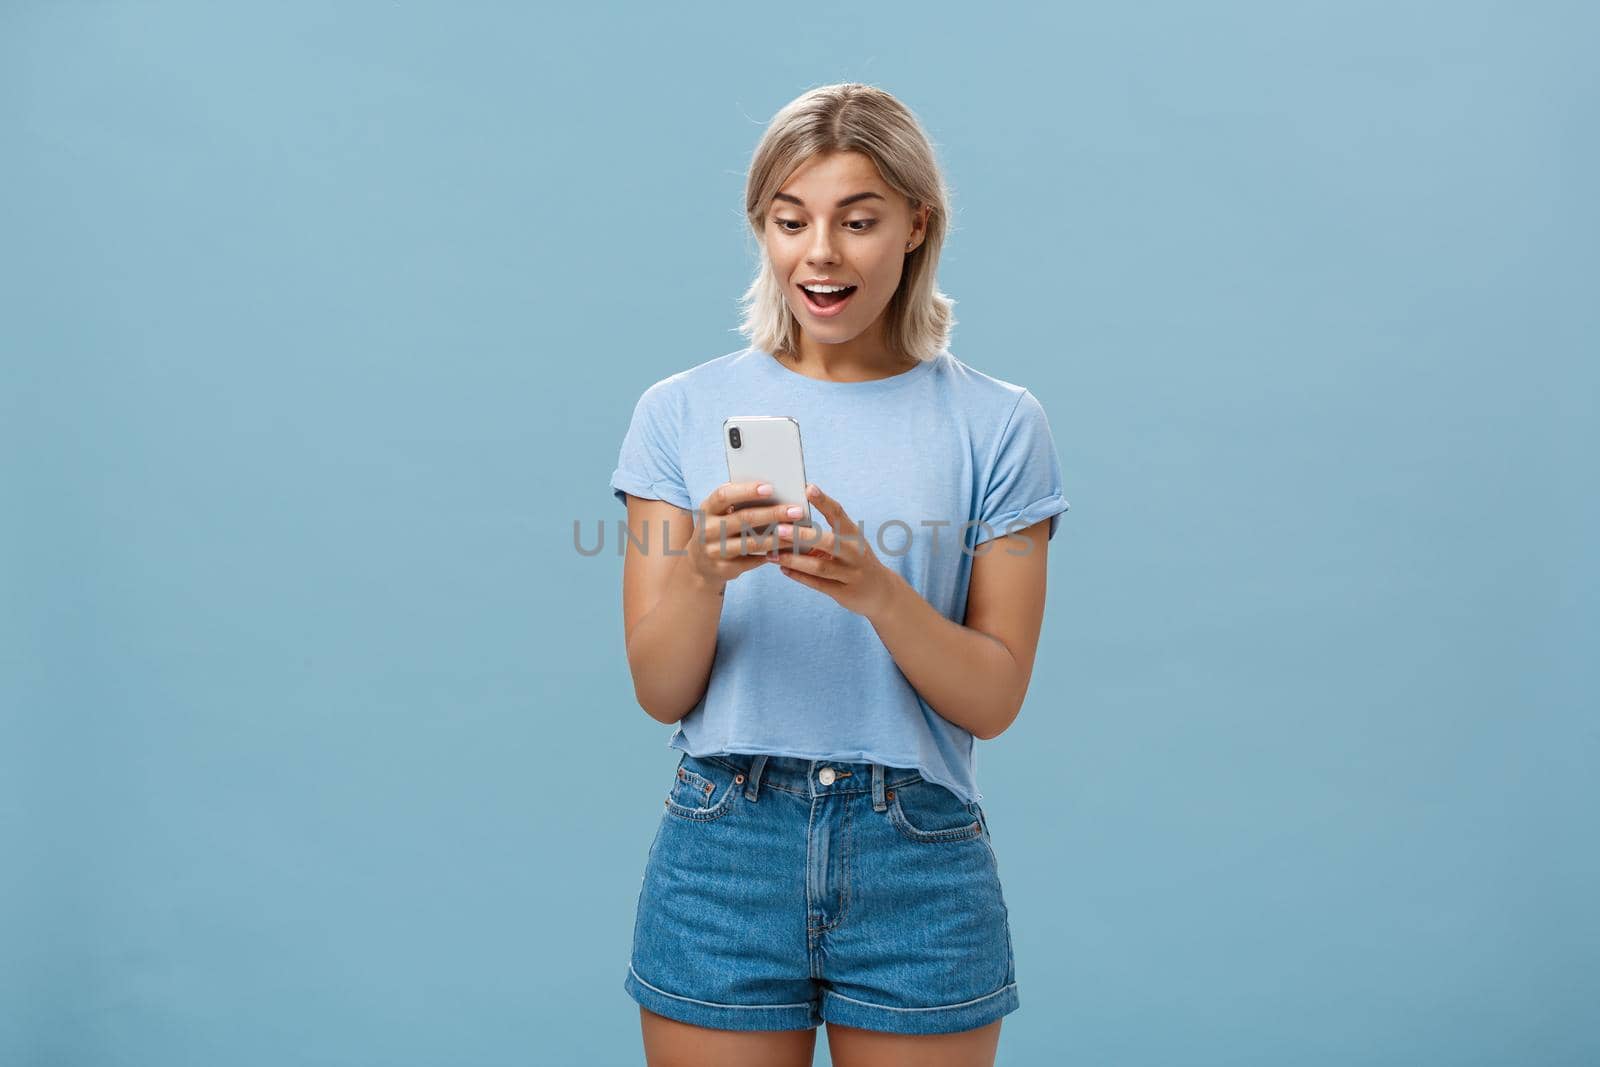 Entertained charming young european female with blond hair in casual outfit holding smartphone being satisfied with great camera and photos gasping and gazing amazed at screen over blue wall. Technology concept